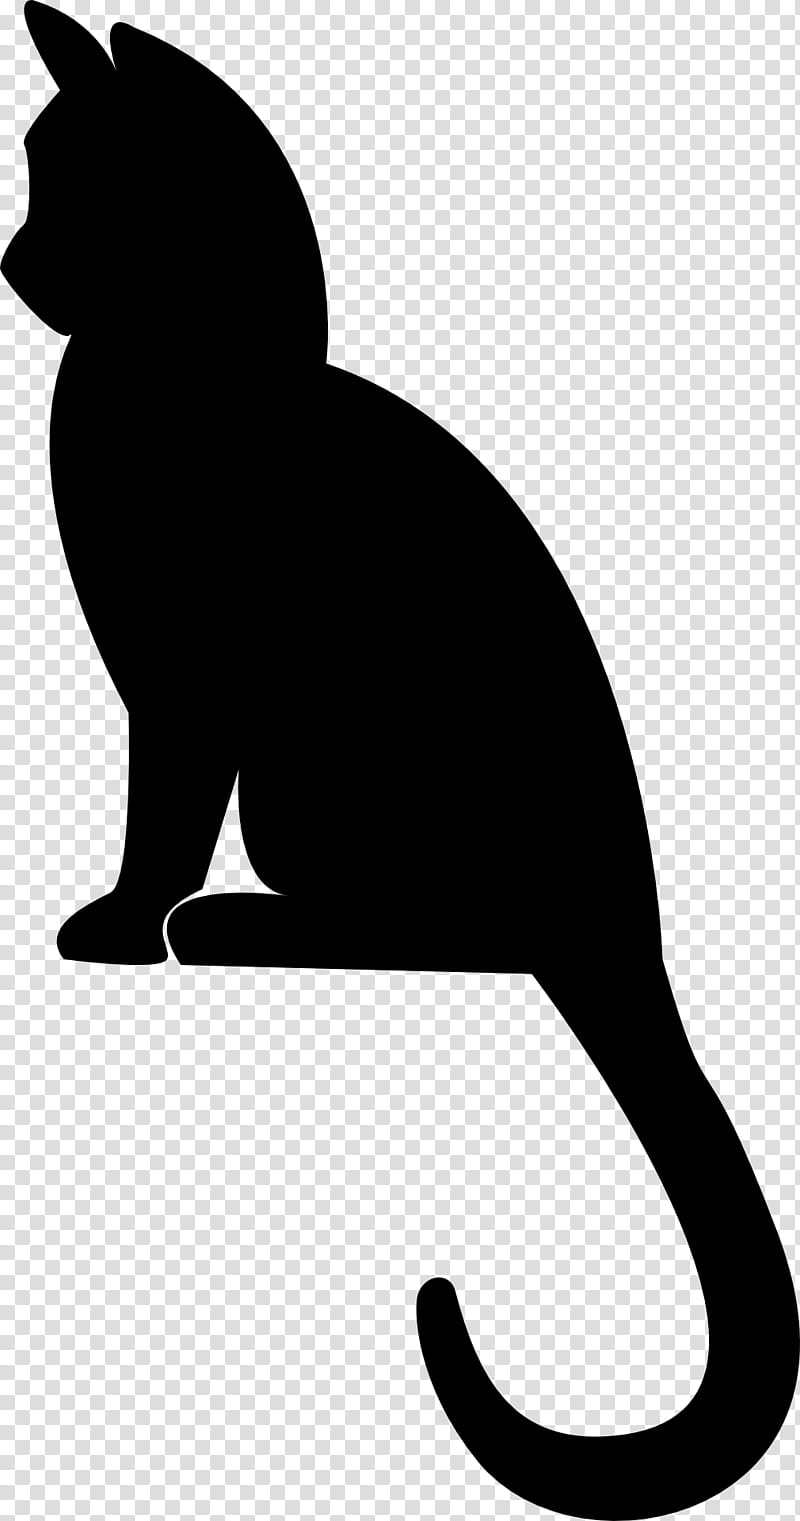 Dog And Cat, Kitten, Silhouette, Pet, Black Cat, Cuteness, Tail, Blackandwhite transparent background PNG clipart